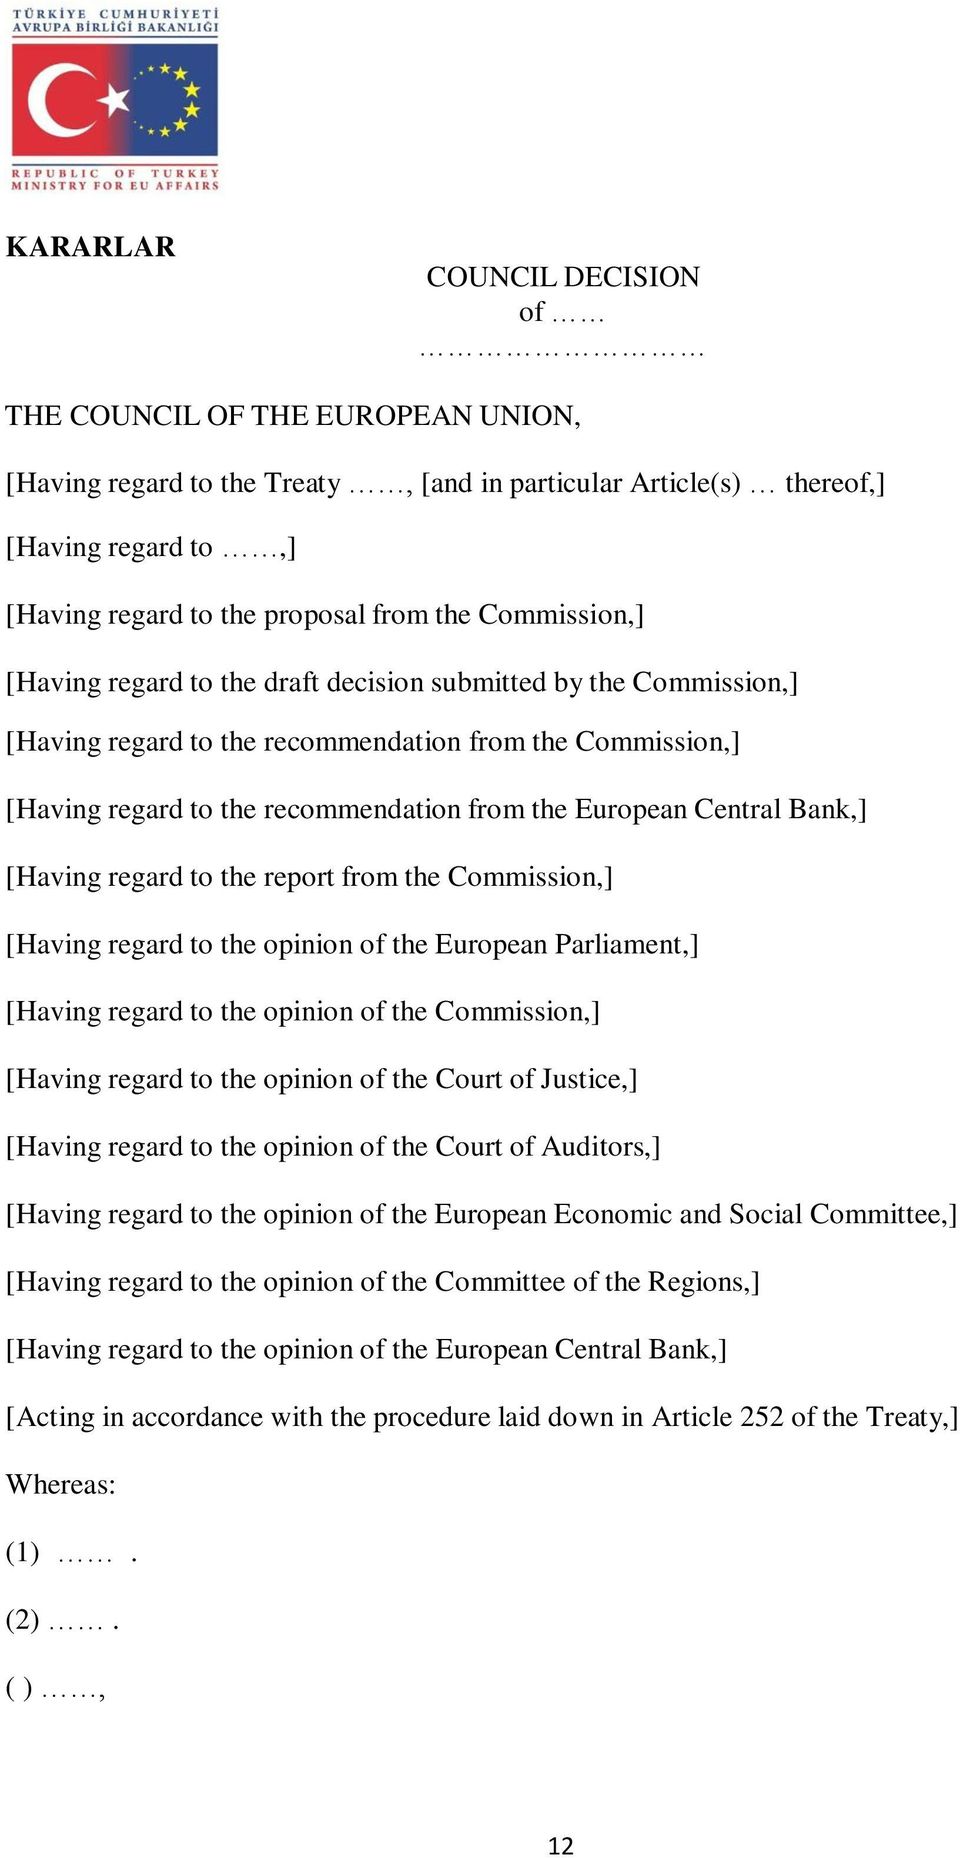 Central Bank,] [Having regard to the report from the Commission,] [Having regard to the opinion of the European Parliament,] [Having regard to the opinion of the Commission,] [Having regard to the